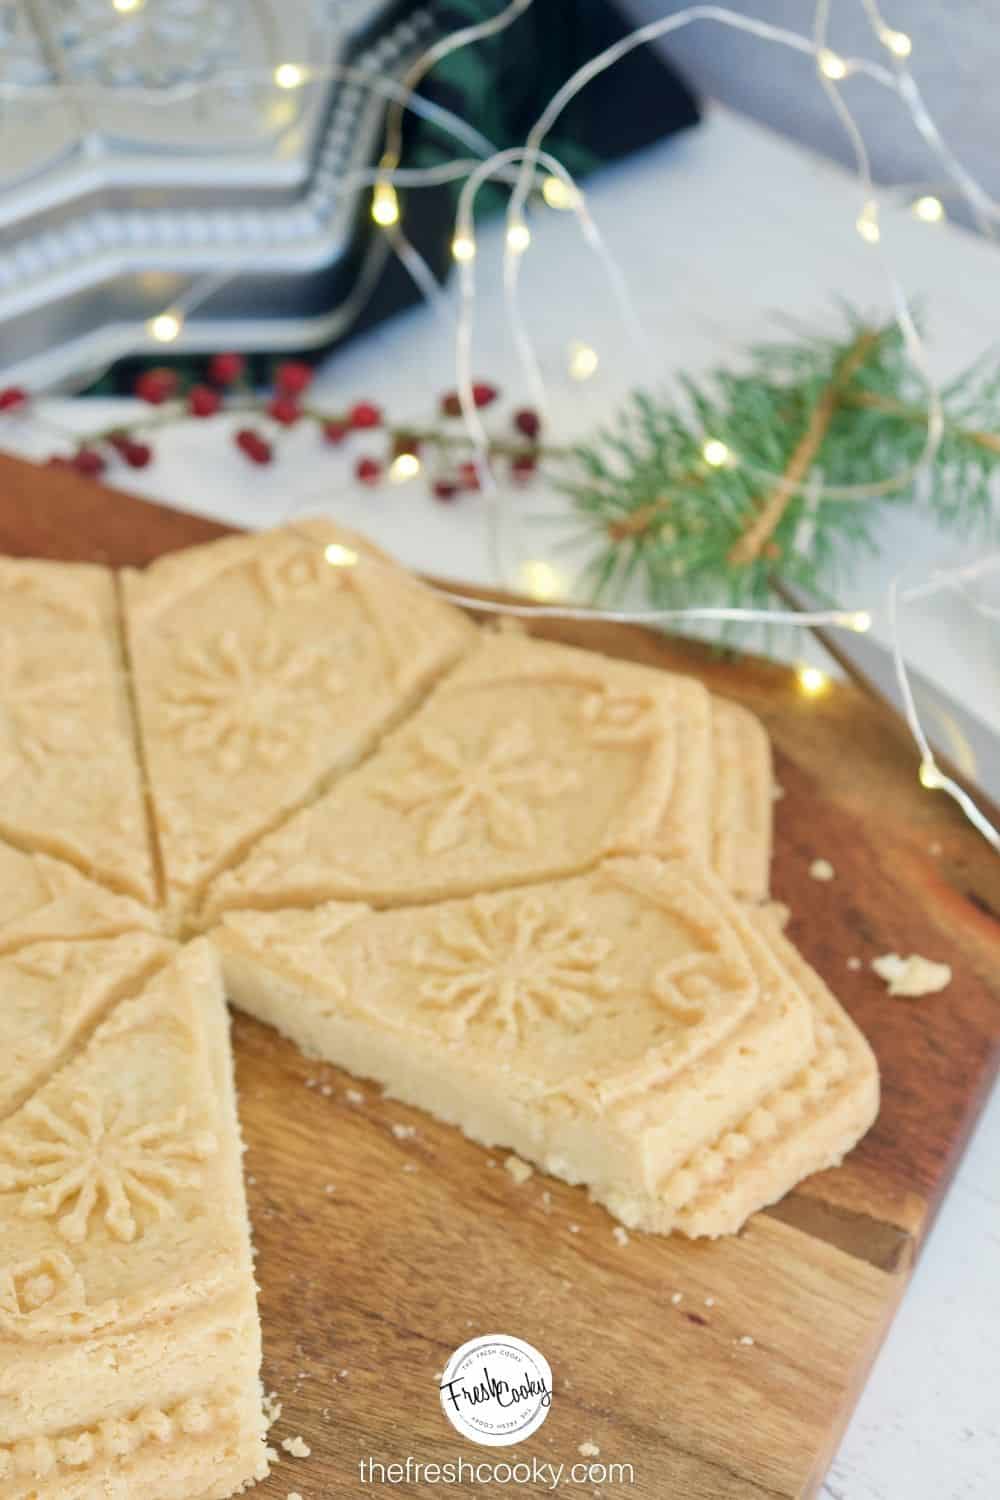 Molded Classic Shortbread Recipe using a snowflake mold, sitting on cutting board with twinkle lights and a sprig of evergreen.